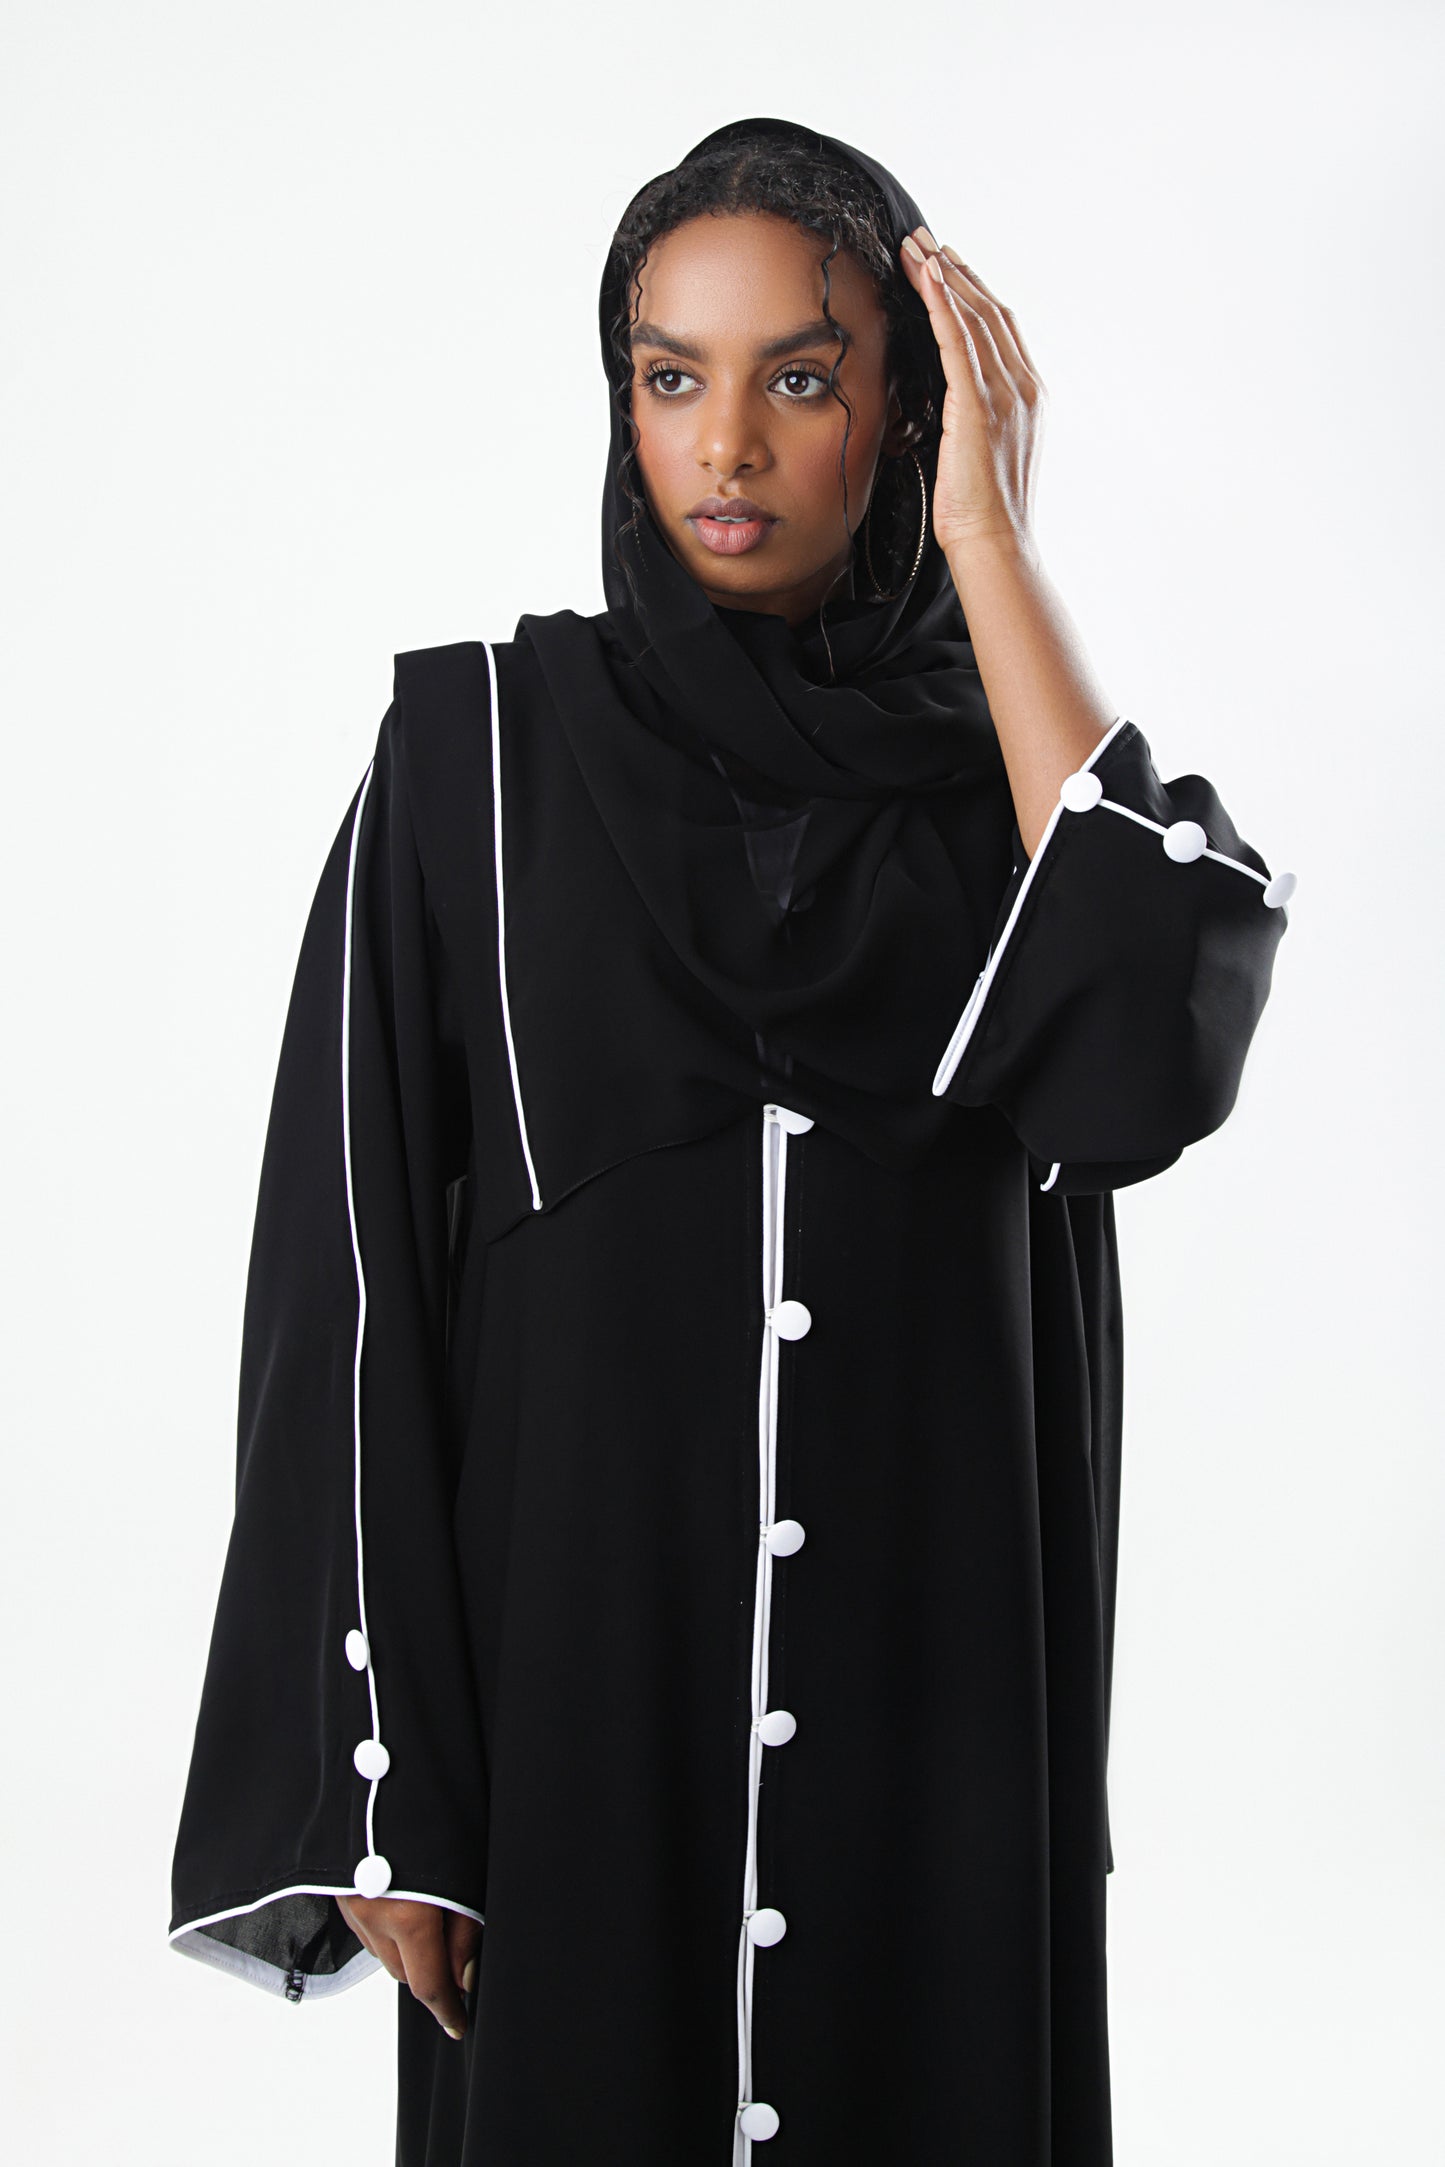 Black Abaya Design With Buttons